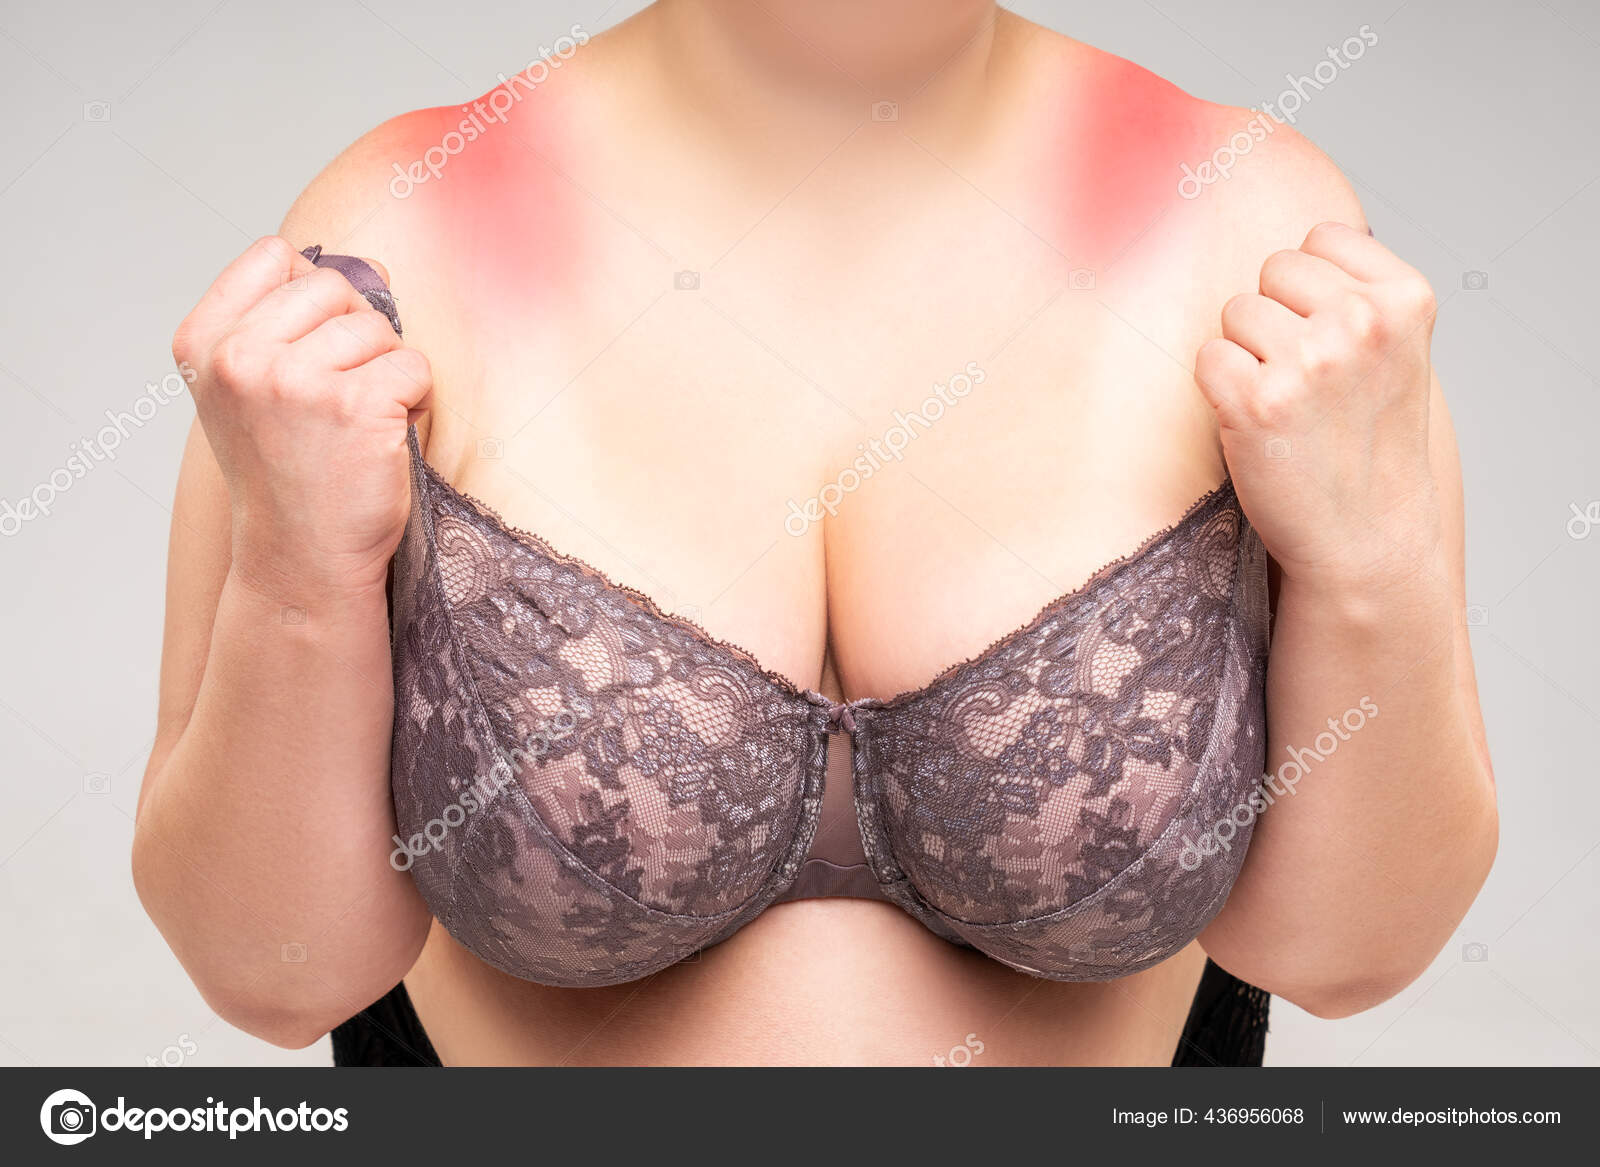 Old Woman With Irritated Skin Under Bra, Irritation On The, 41% OFF